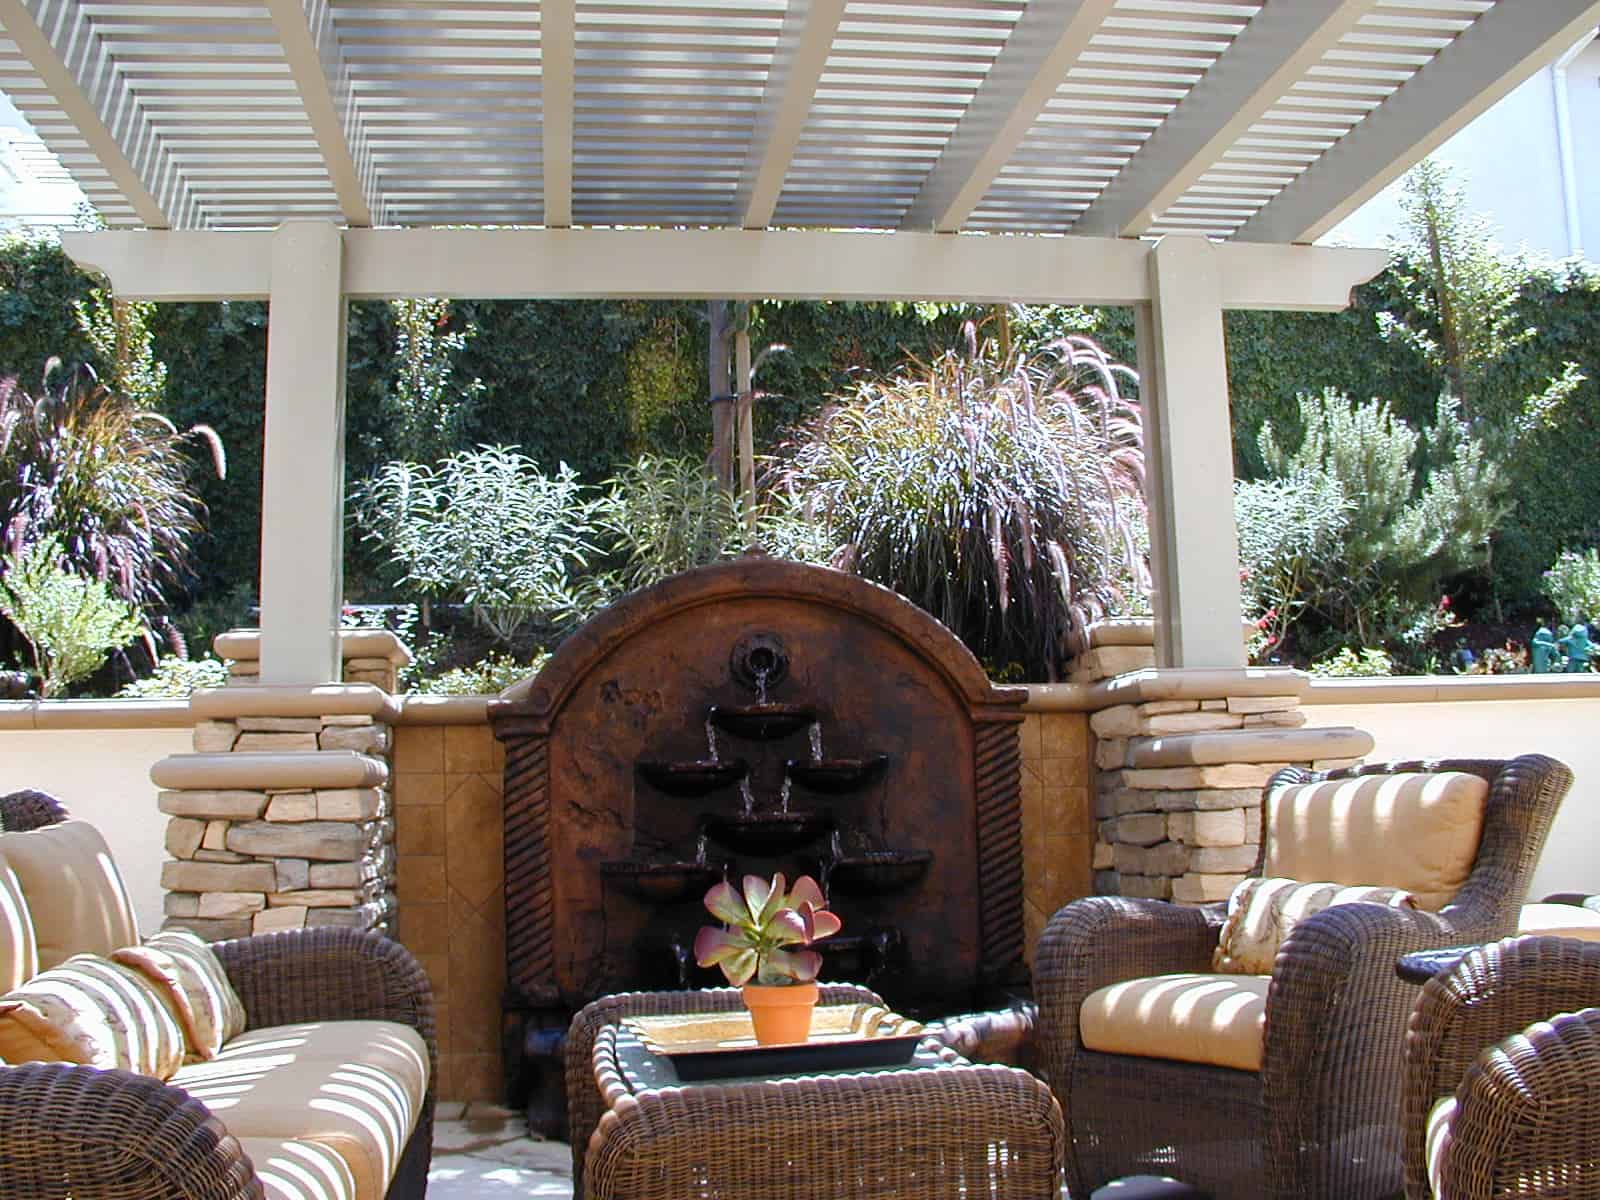 Staying Cool in Style: Alumawood Lattice Patio Covers